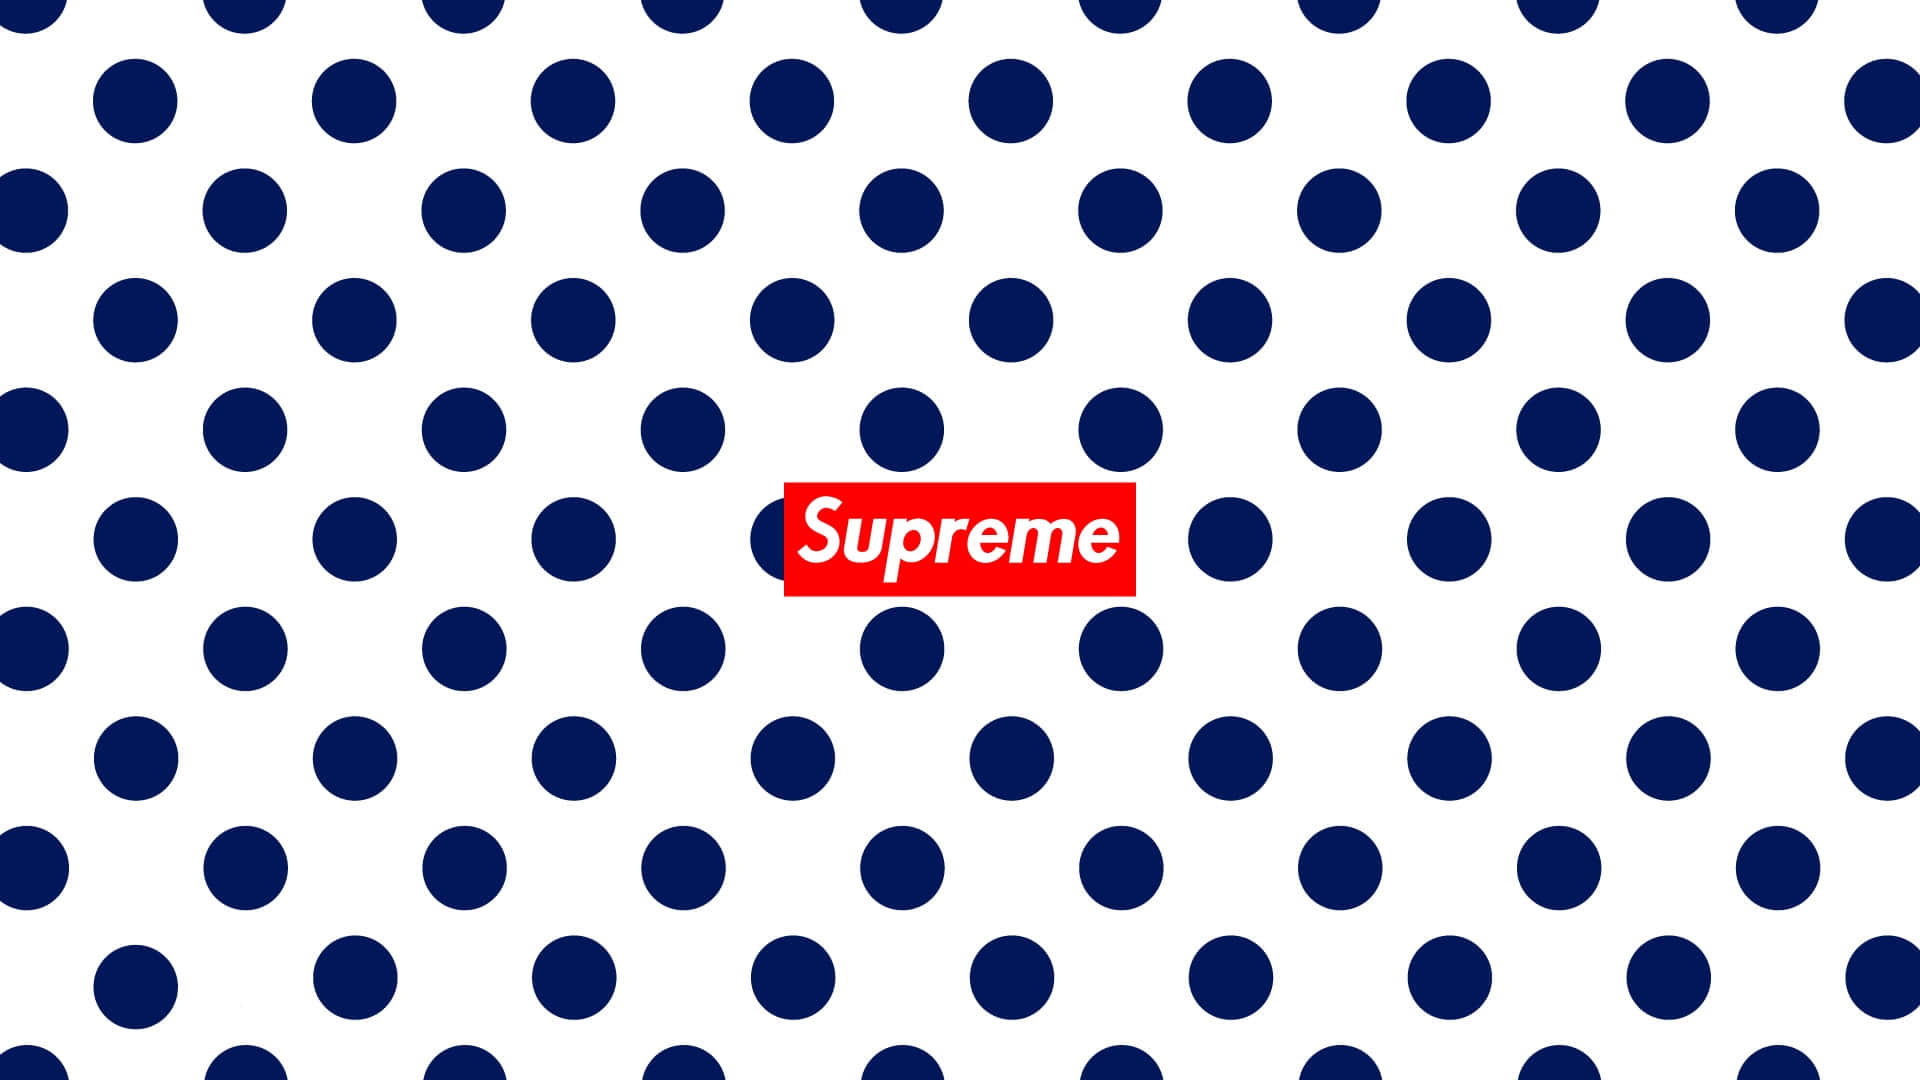 The Supreme logo in all its bold, celebrated glory. Wallpaper